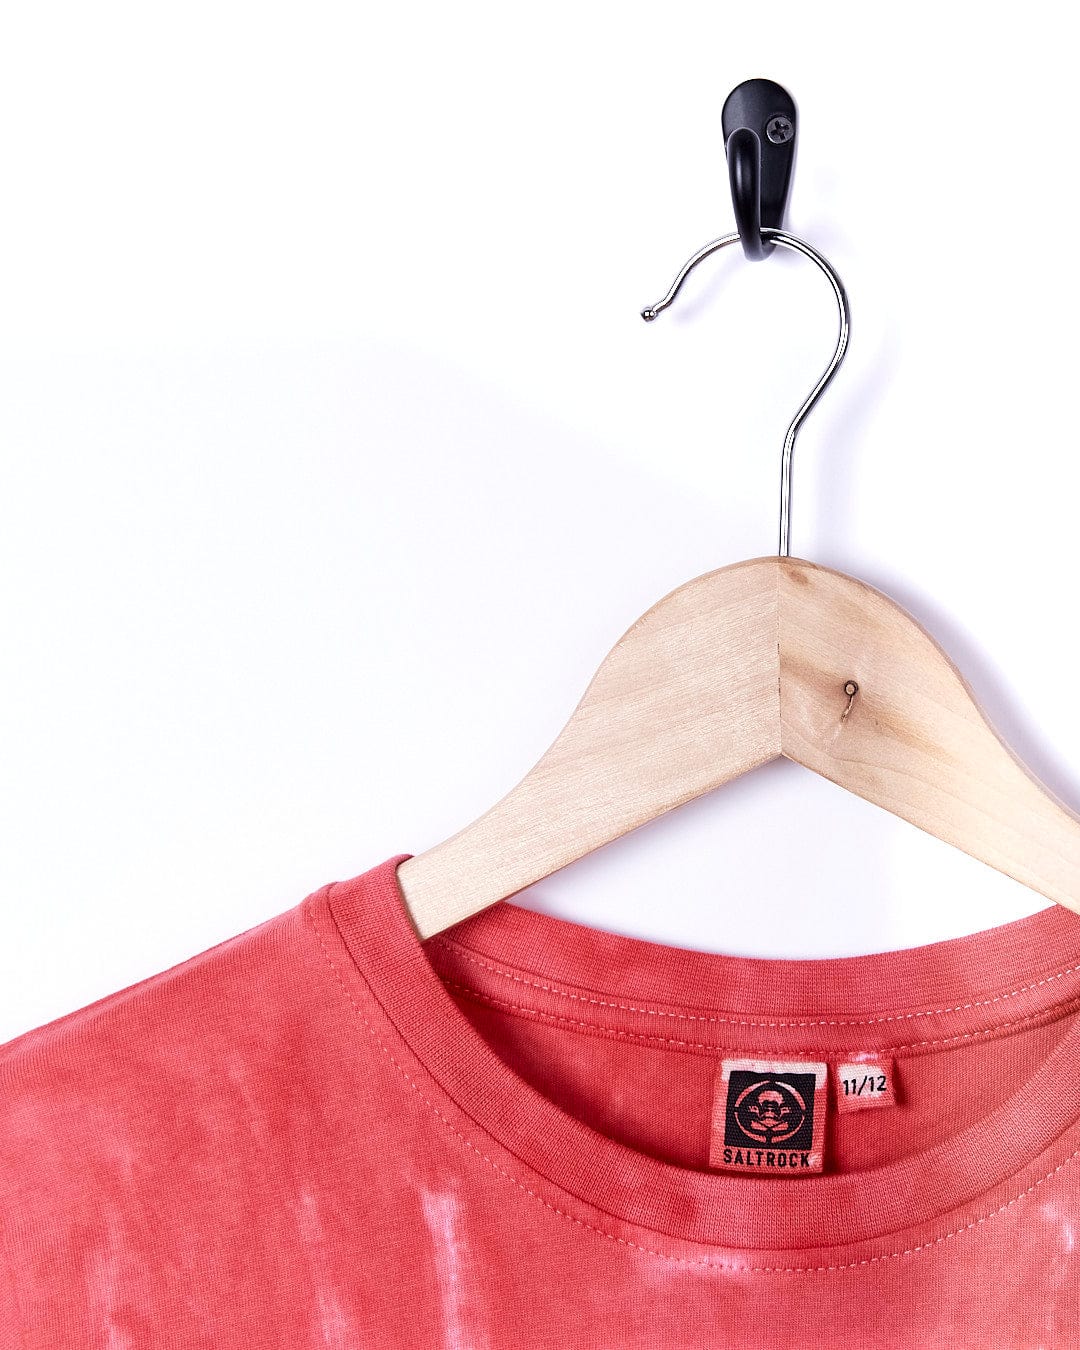 A Born To Ride - Kids Short Sleeve T-Shirt - Red hangs on a wooden hanger by Saltrock.